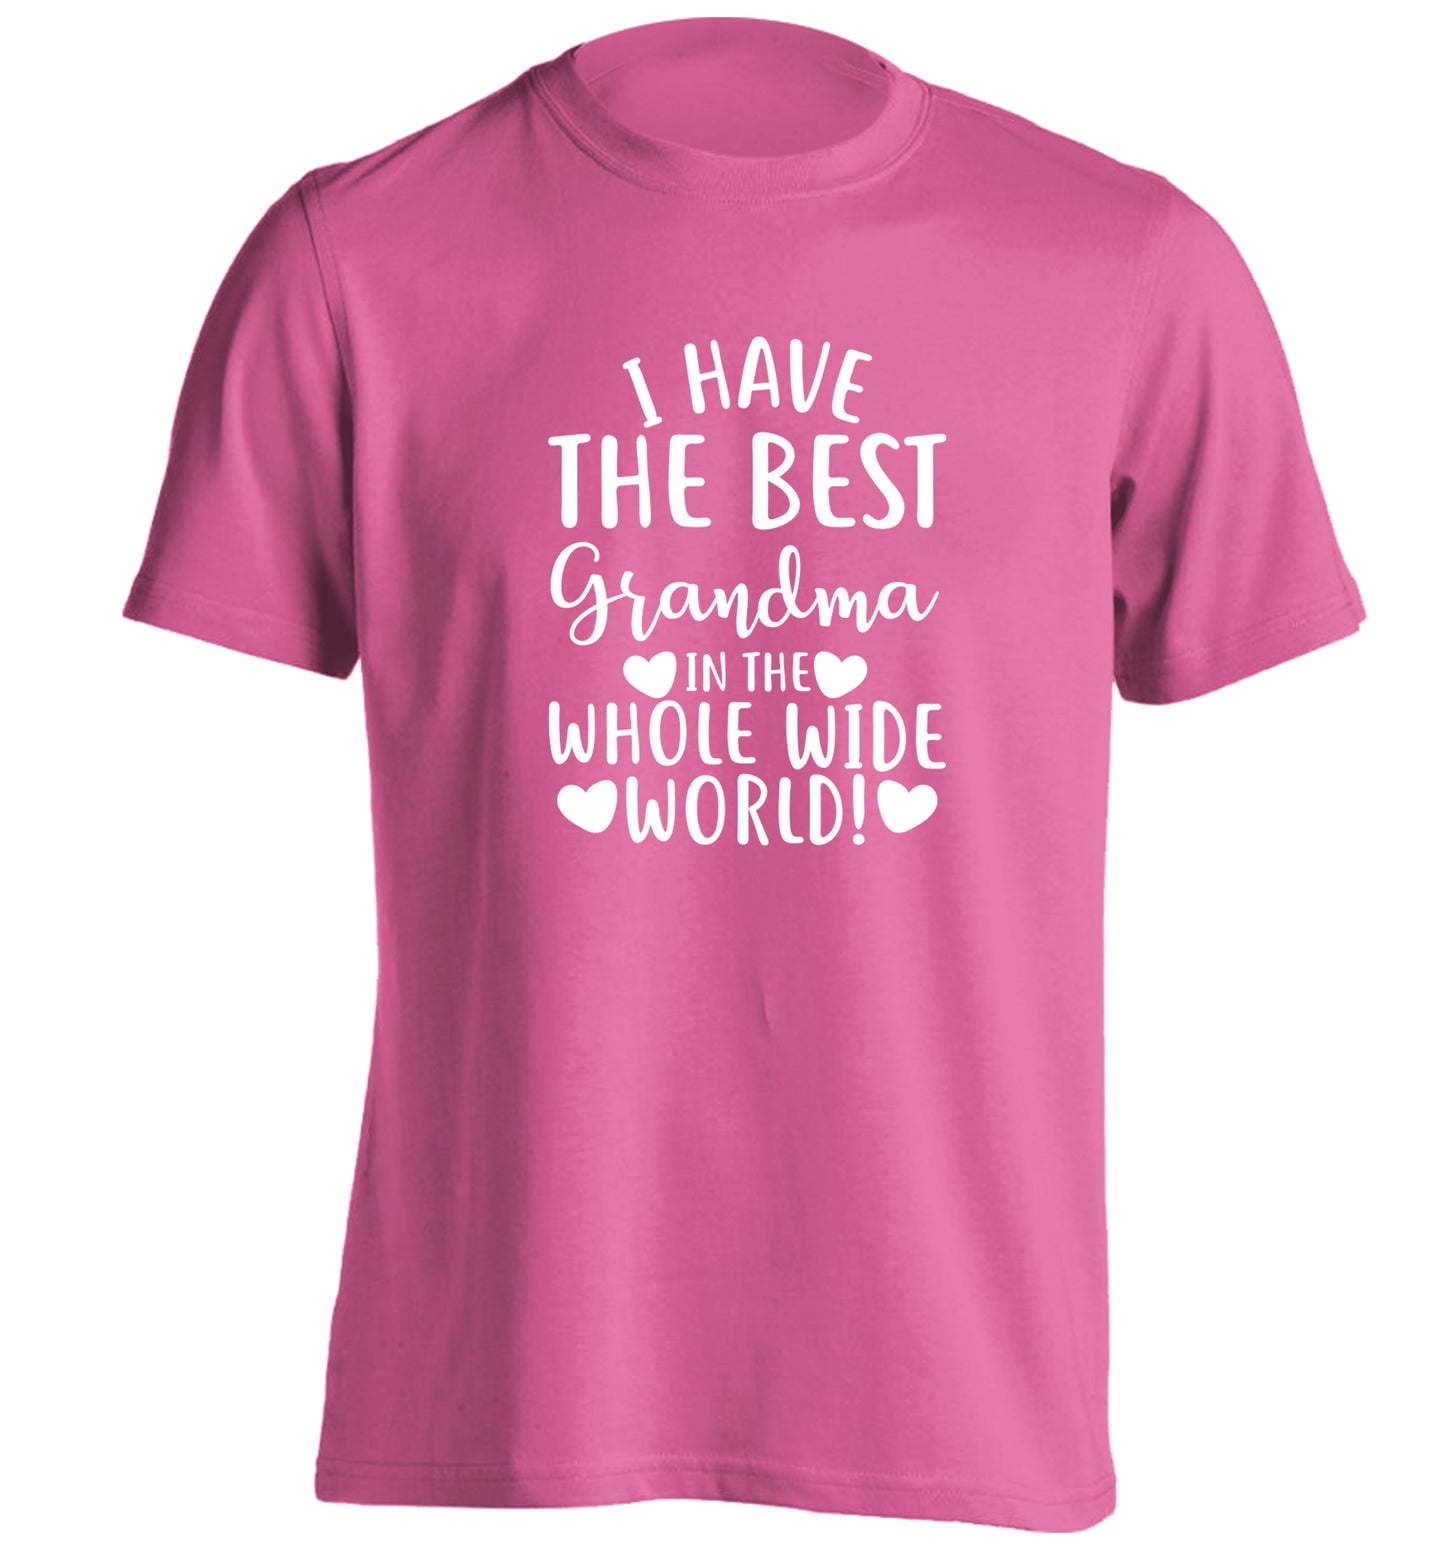 I have the best grandma in the whole wide world! adults unisex pink Tshirt 2XL